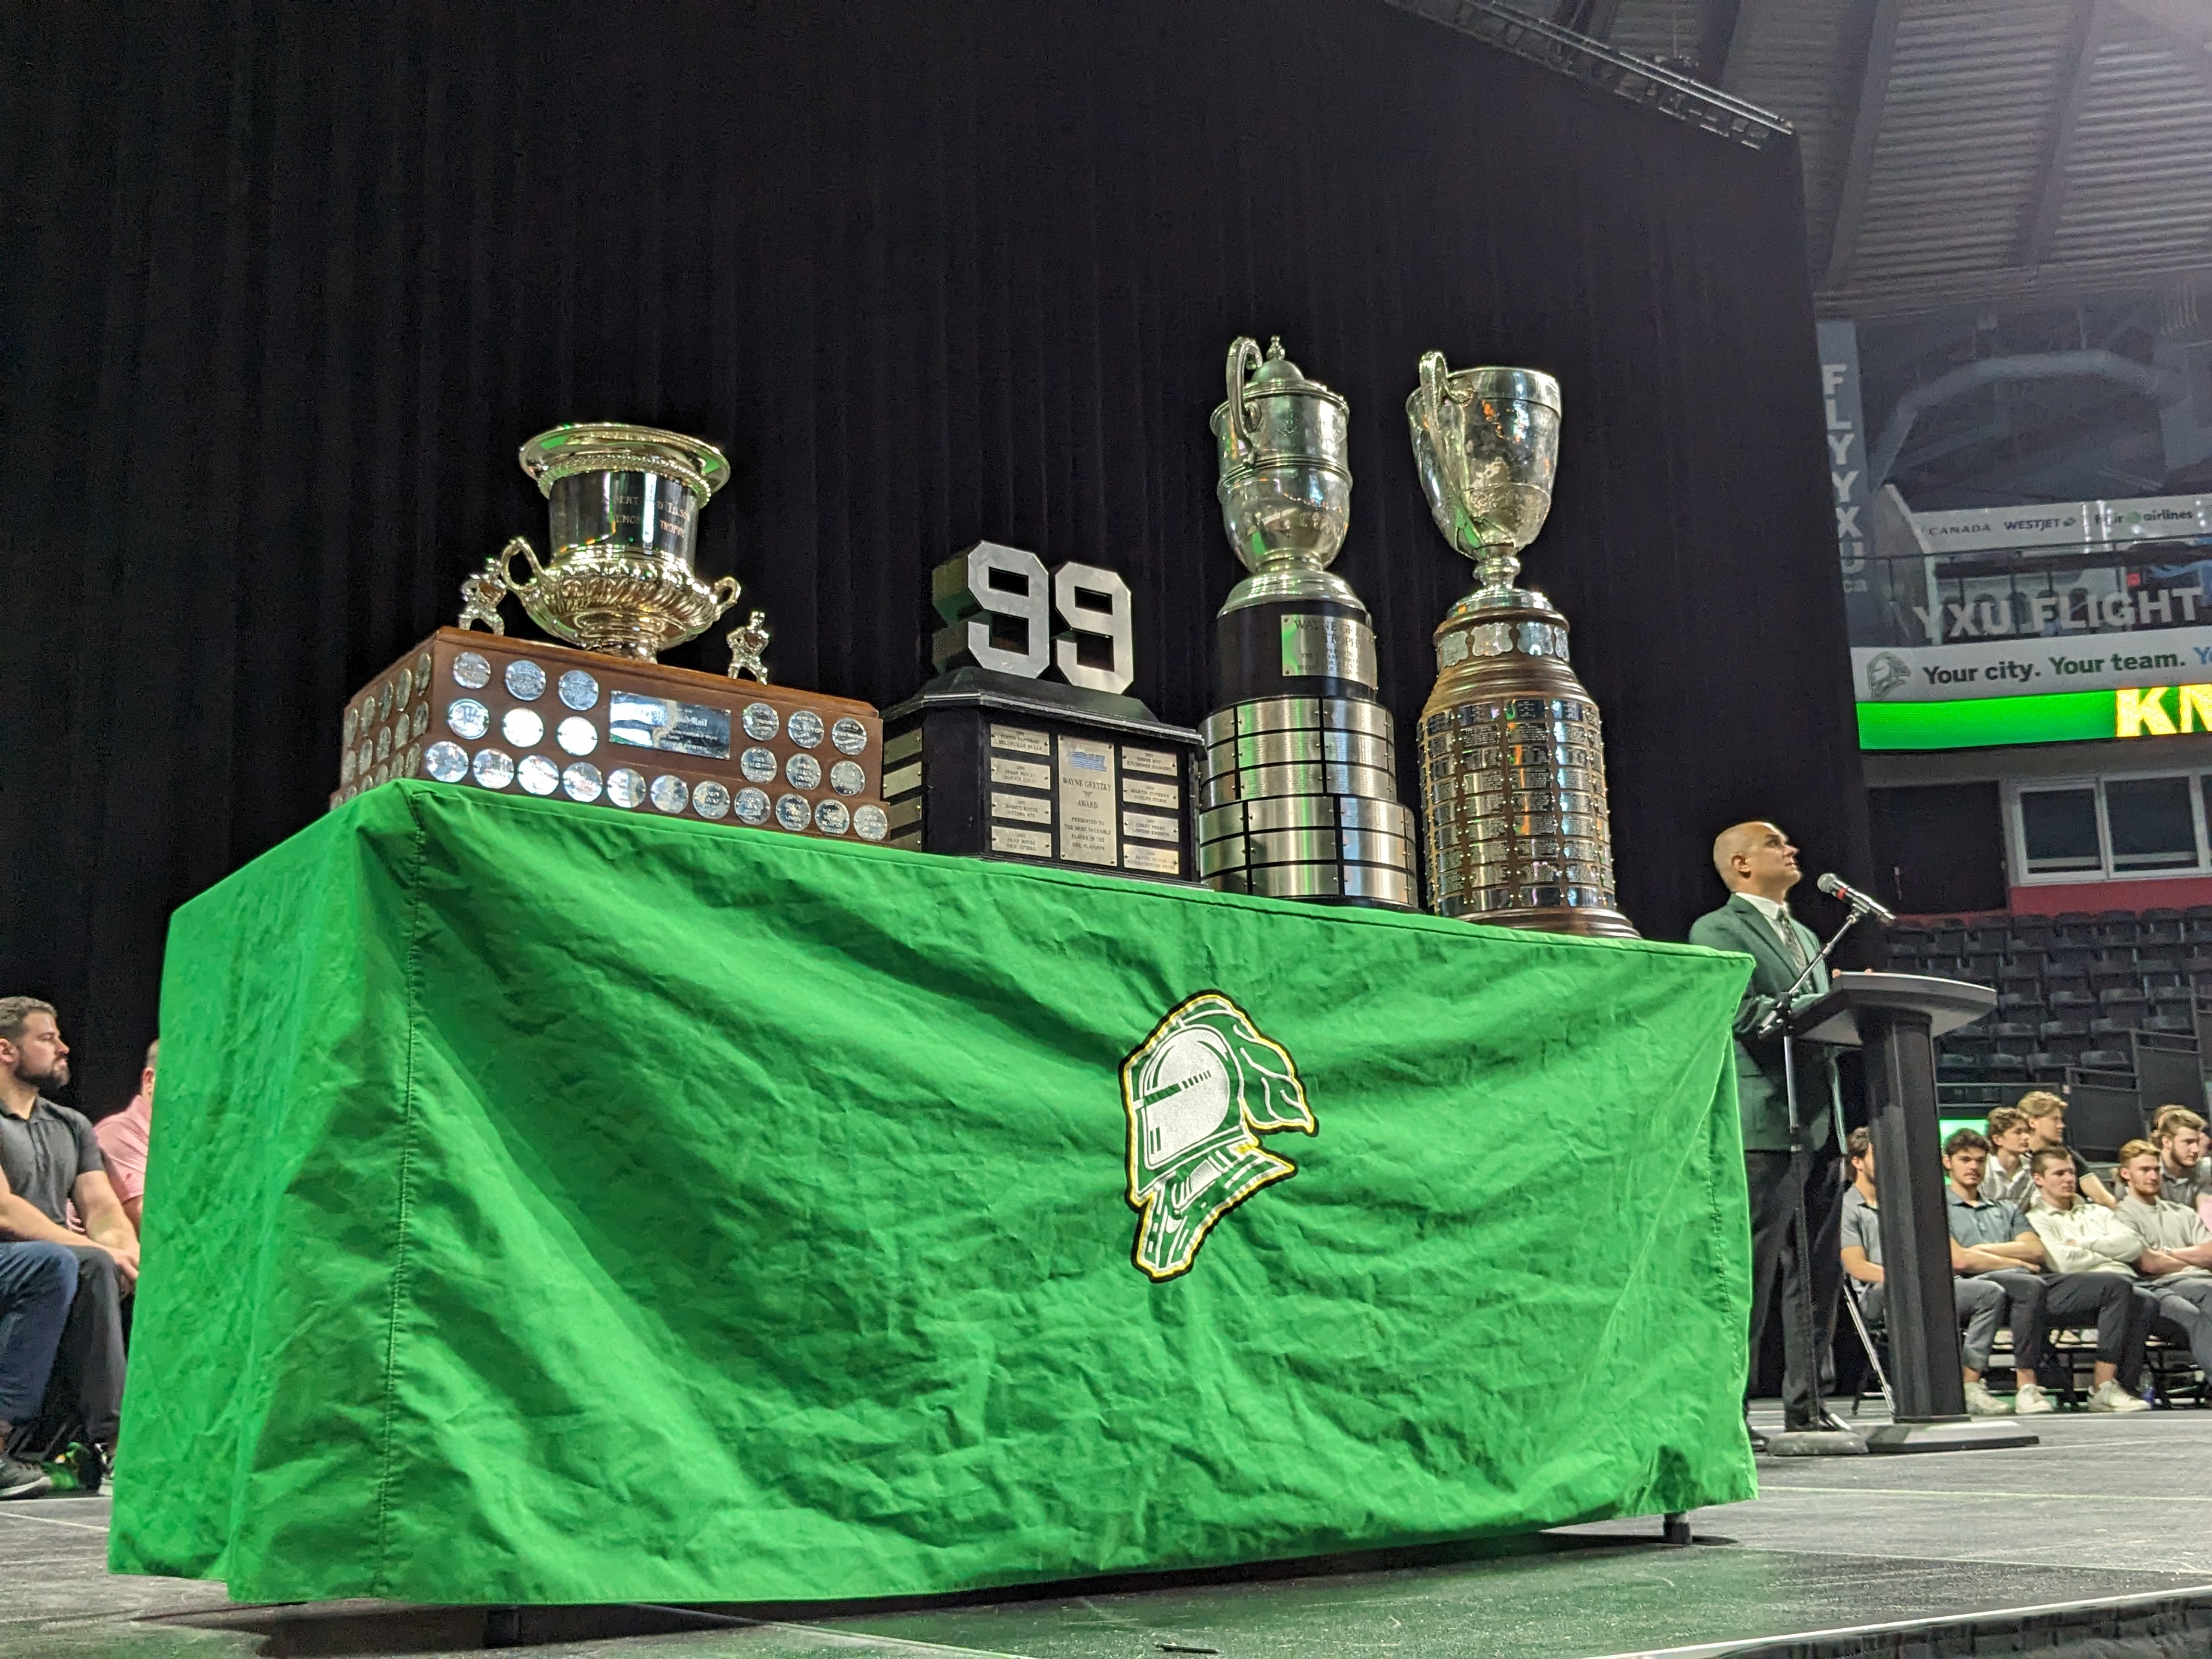 London Knights championship celebrations draw thousands to Budweiser
Gardens